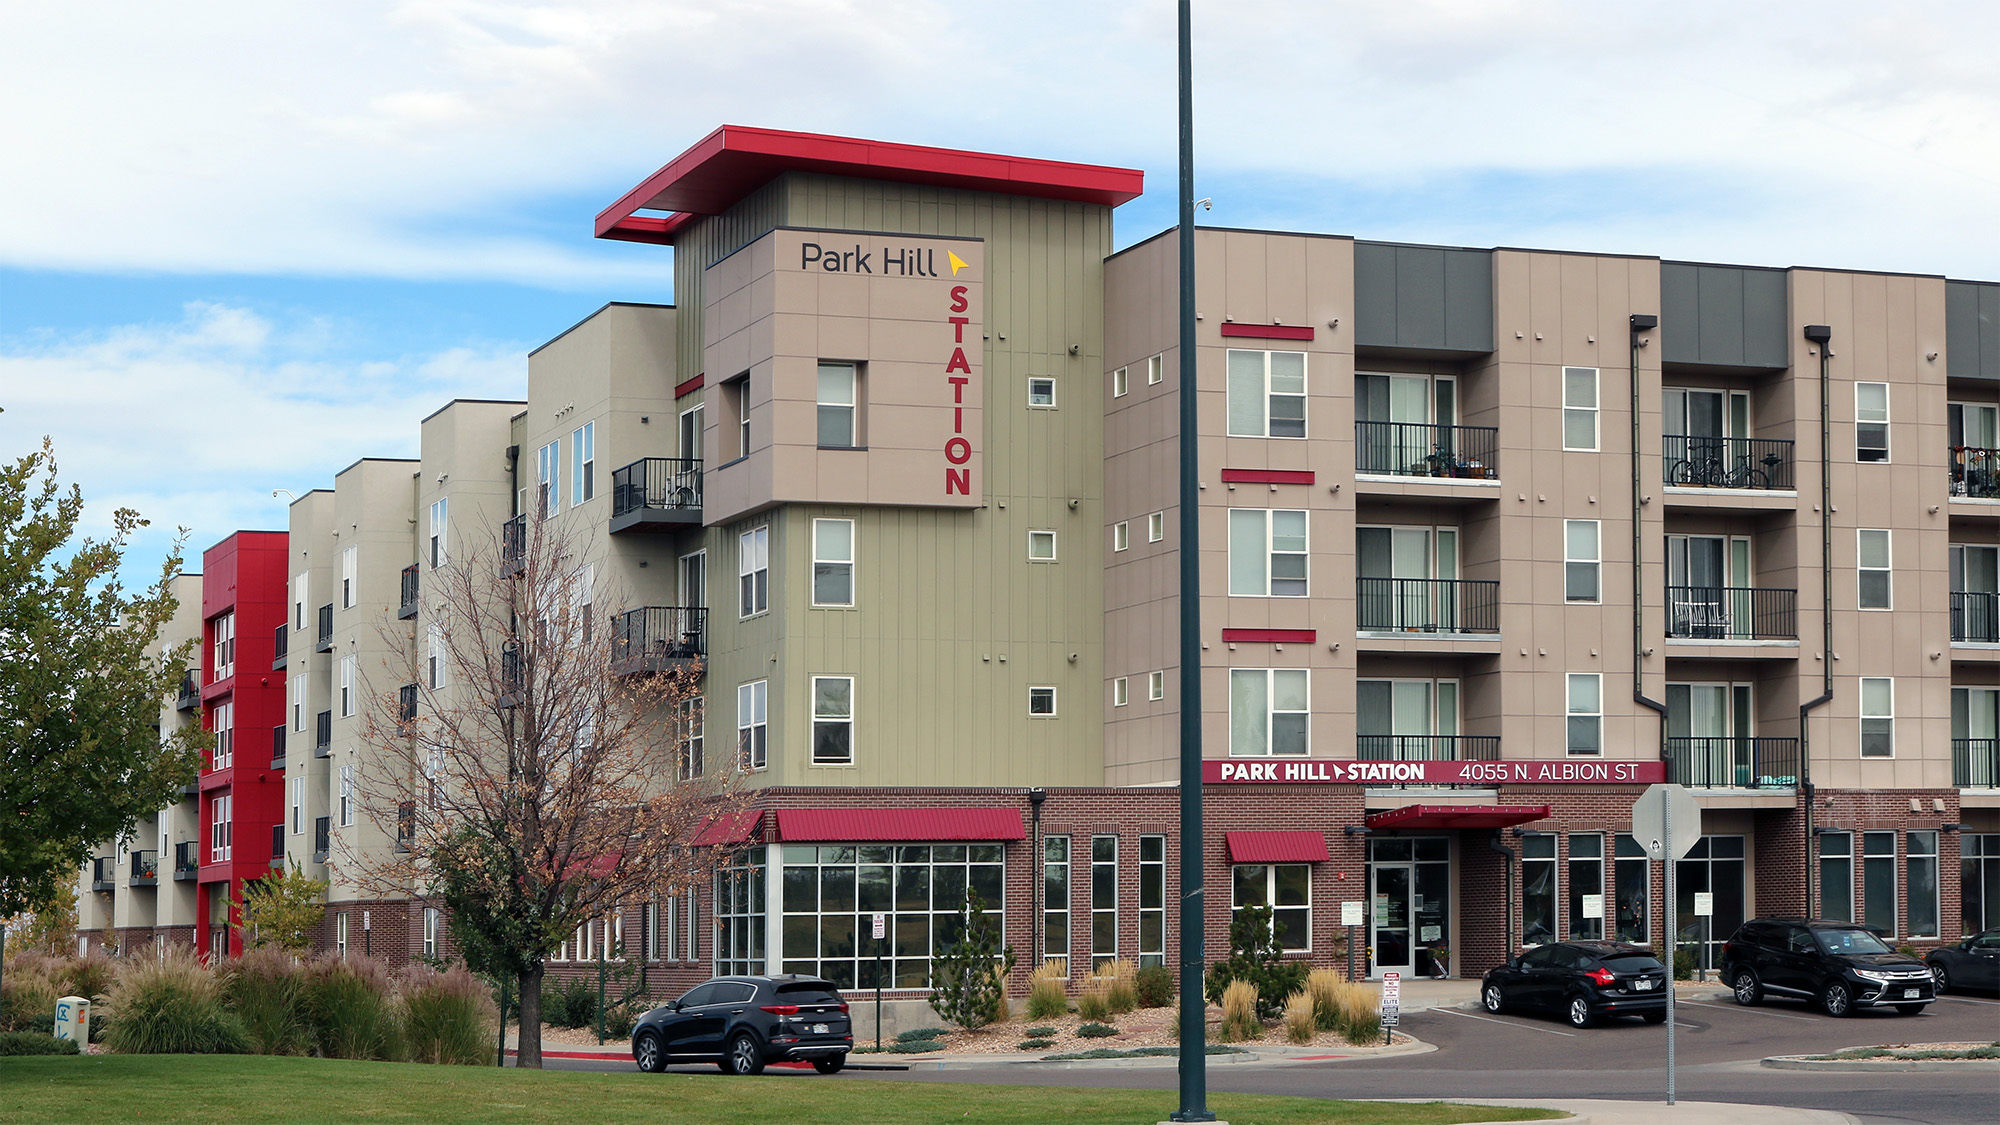 Photo of exterior corner of 4 storey apartment building with signage and red awnings Parkhill Station